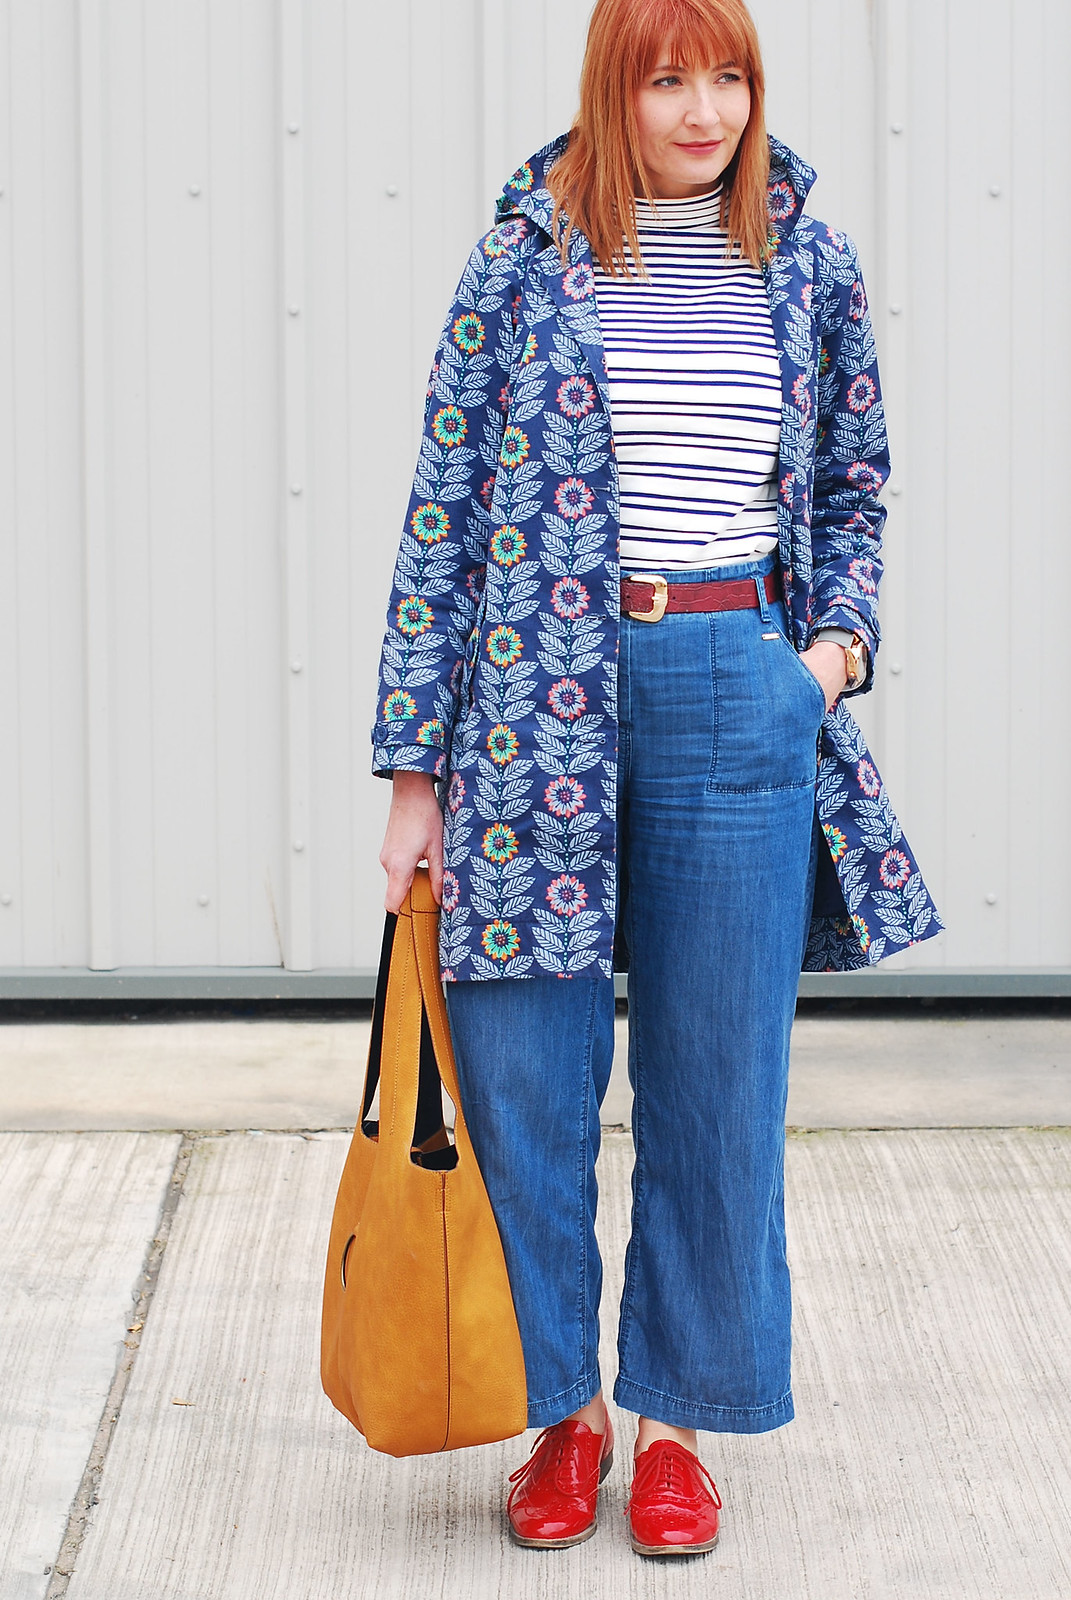 Bright spring weather outfit: Floral Seasalt raincoat high neck stripe Breton top wide leg cotton denim trousers red brogues ochre bucket bag | Not Dressed As Lamb, over 40 style